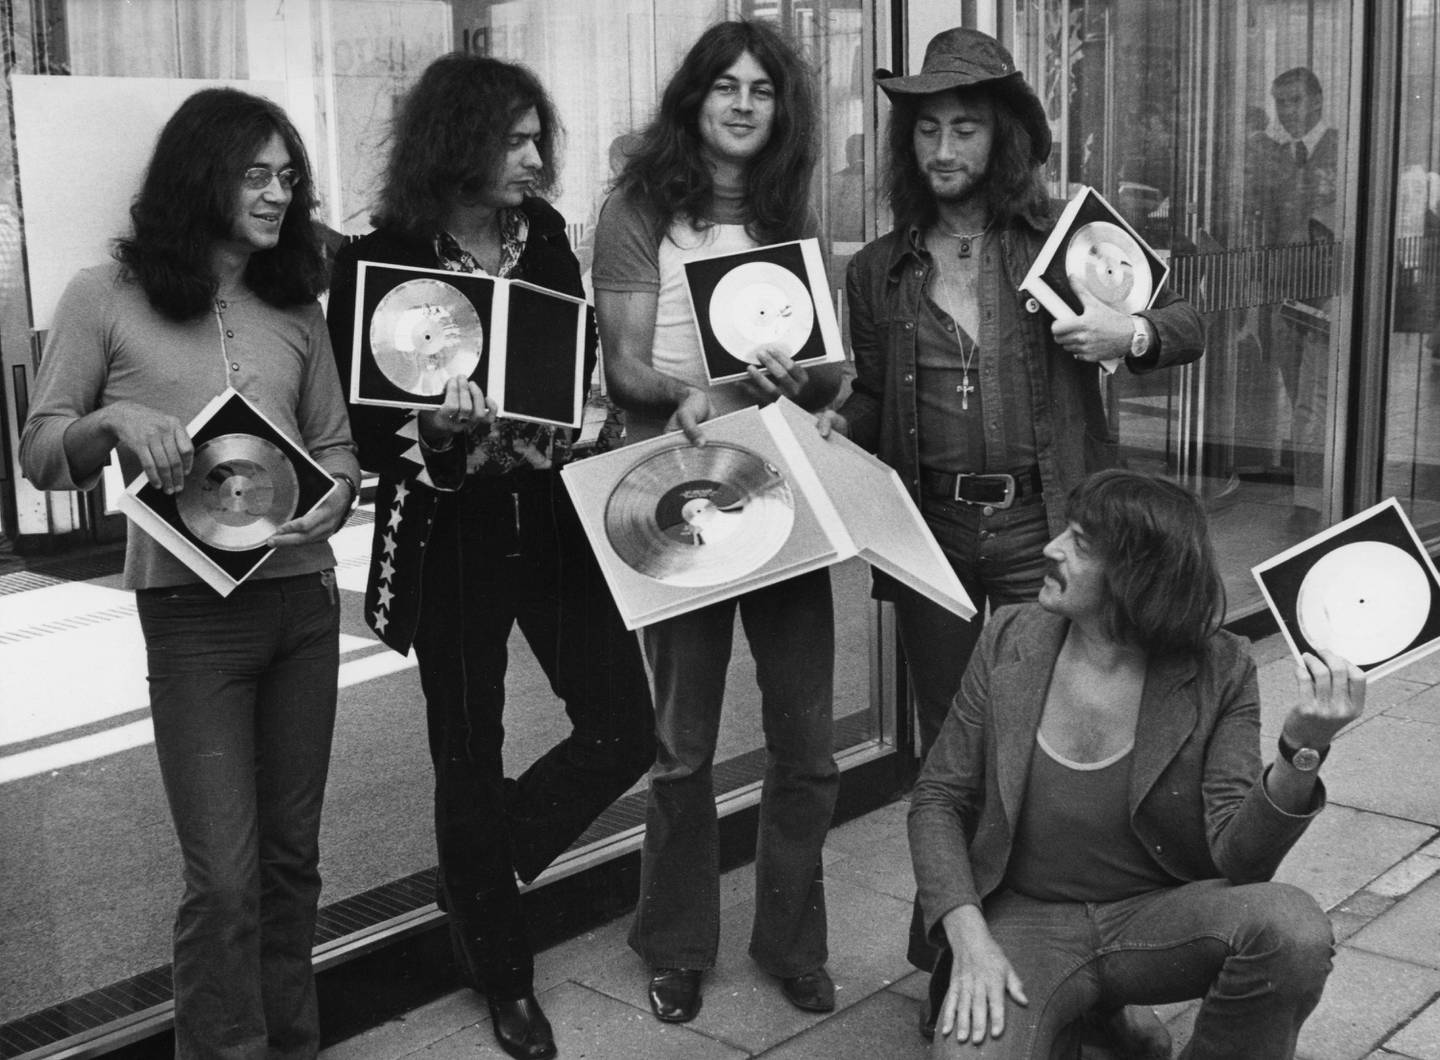 FILE - In this Sept. 1, 1971, file photo, British rock band Deep Purple present their golden record they received in West Berlin for the sales of their latest album, "Deep Purple in Rock," in West Germany. Deep Purple joins others as inductees in the 2016 class at the Rock and Roll Hall of Fame. The rock hall announced Thursday, Dec. 17, 2015, that Chicago, Cheap Trick, N.W.A. and Steve Miller will join as members in an April 8 induction ceremony in Brooklyn.  (AP Photo/Edwin Reichert, File)